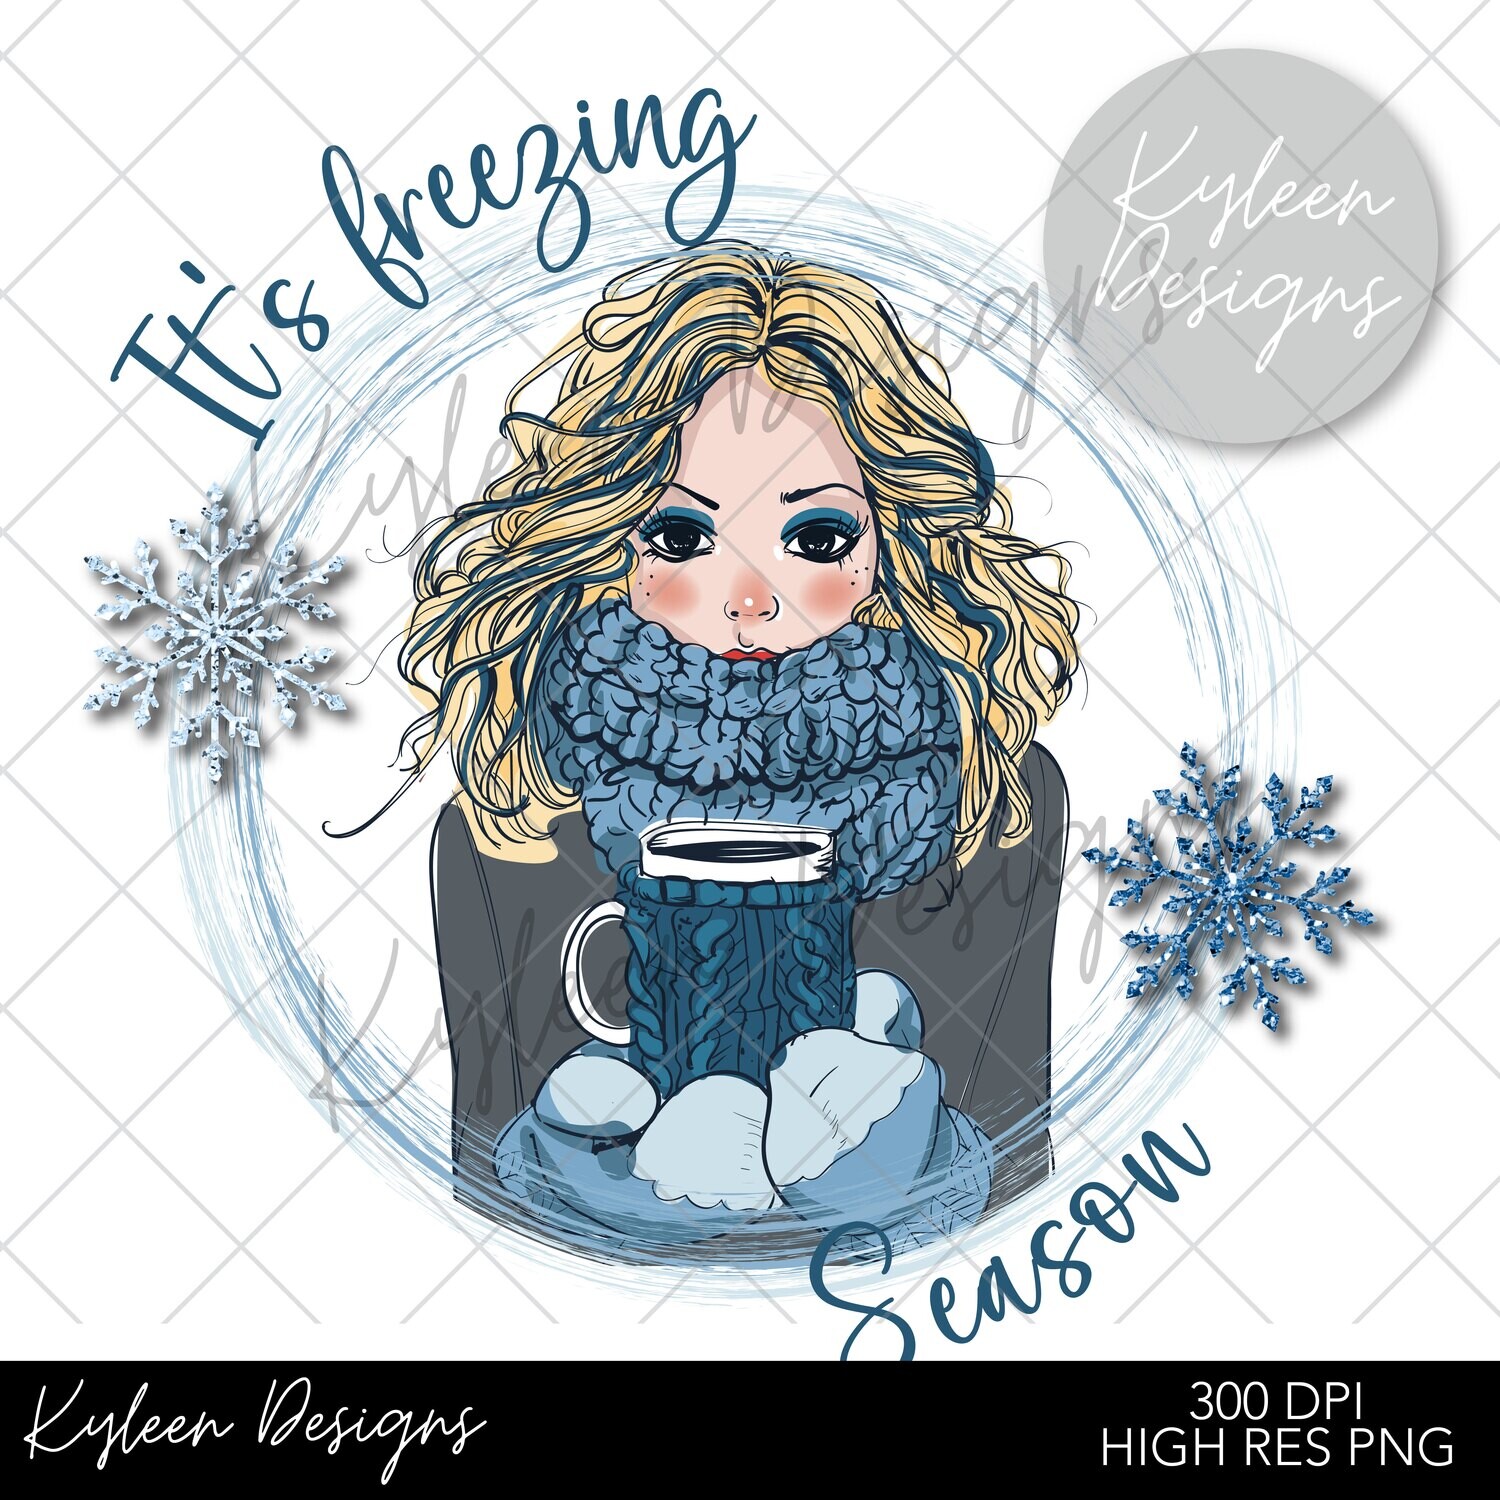 It's freezing season for sublimation, waterslide High res PNG digital file-Blonde